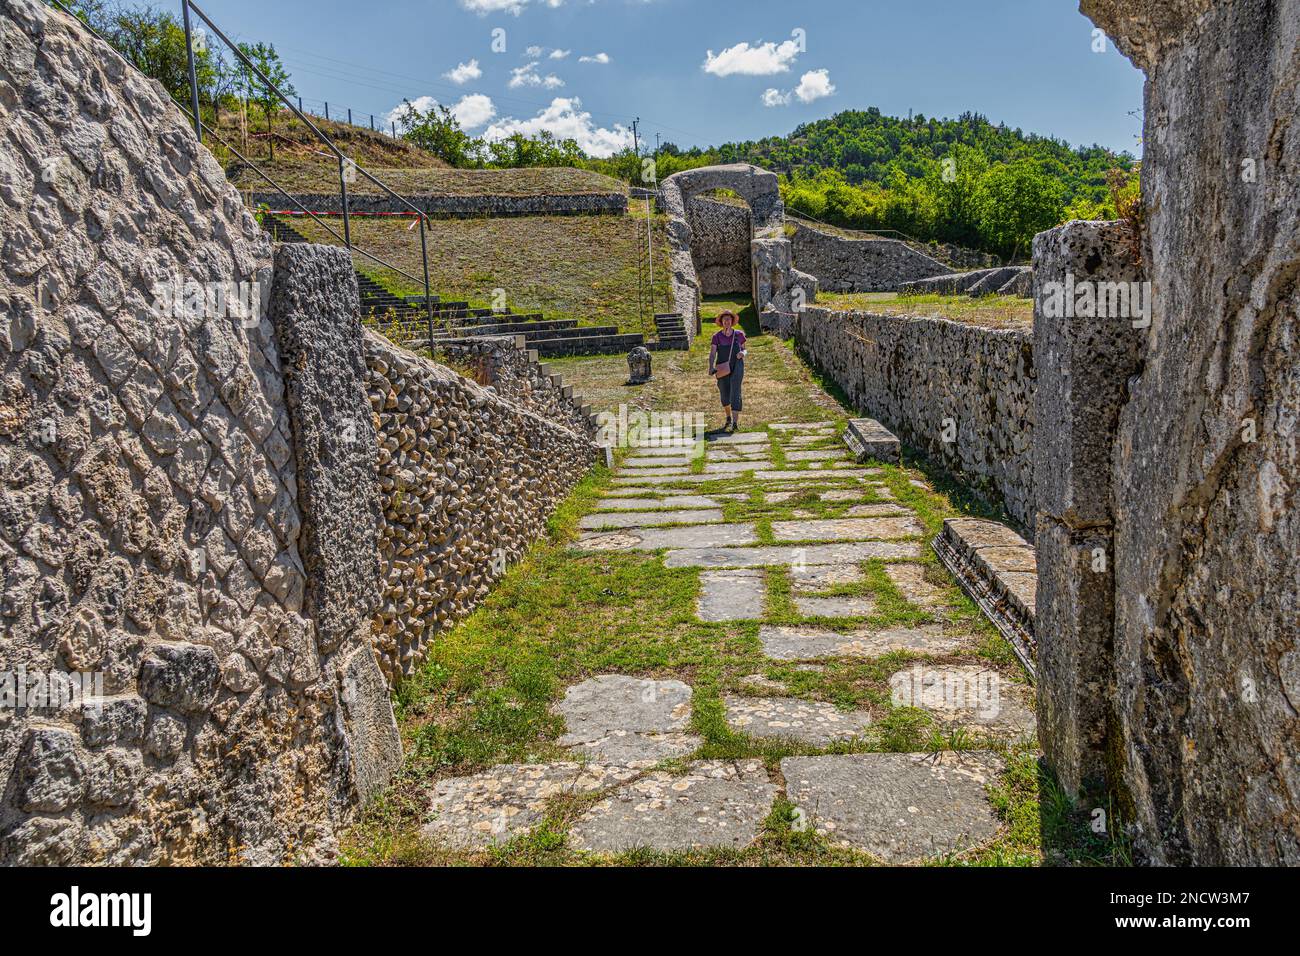 the archaeological site of Amiternum, an ancient Italic city founded by the Sabines, north of L'Aquila. San Vittorino, L'Aquila province, Abruzzo, Ita Stock Photo